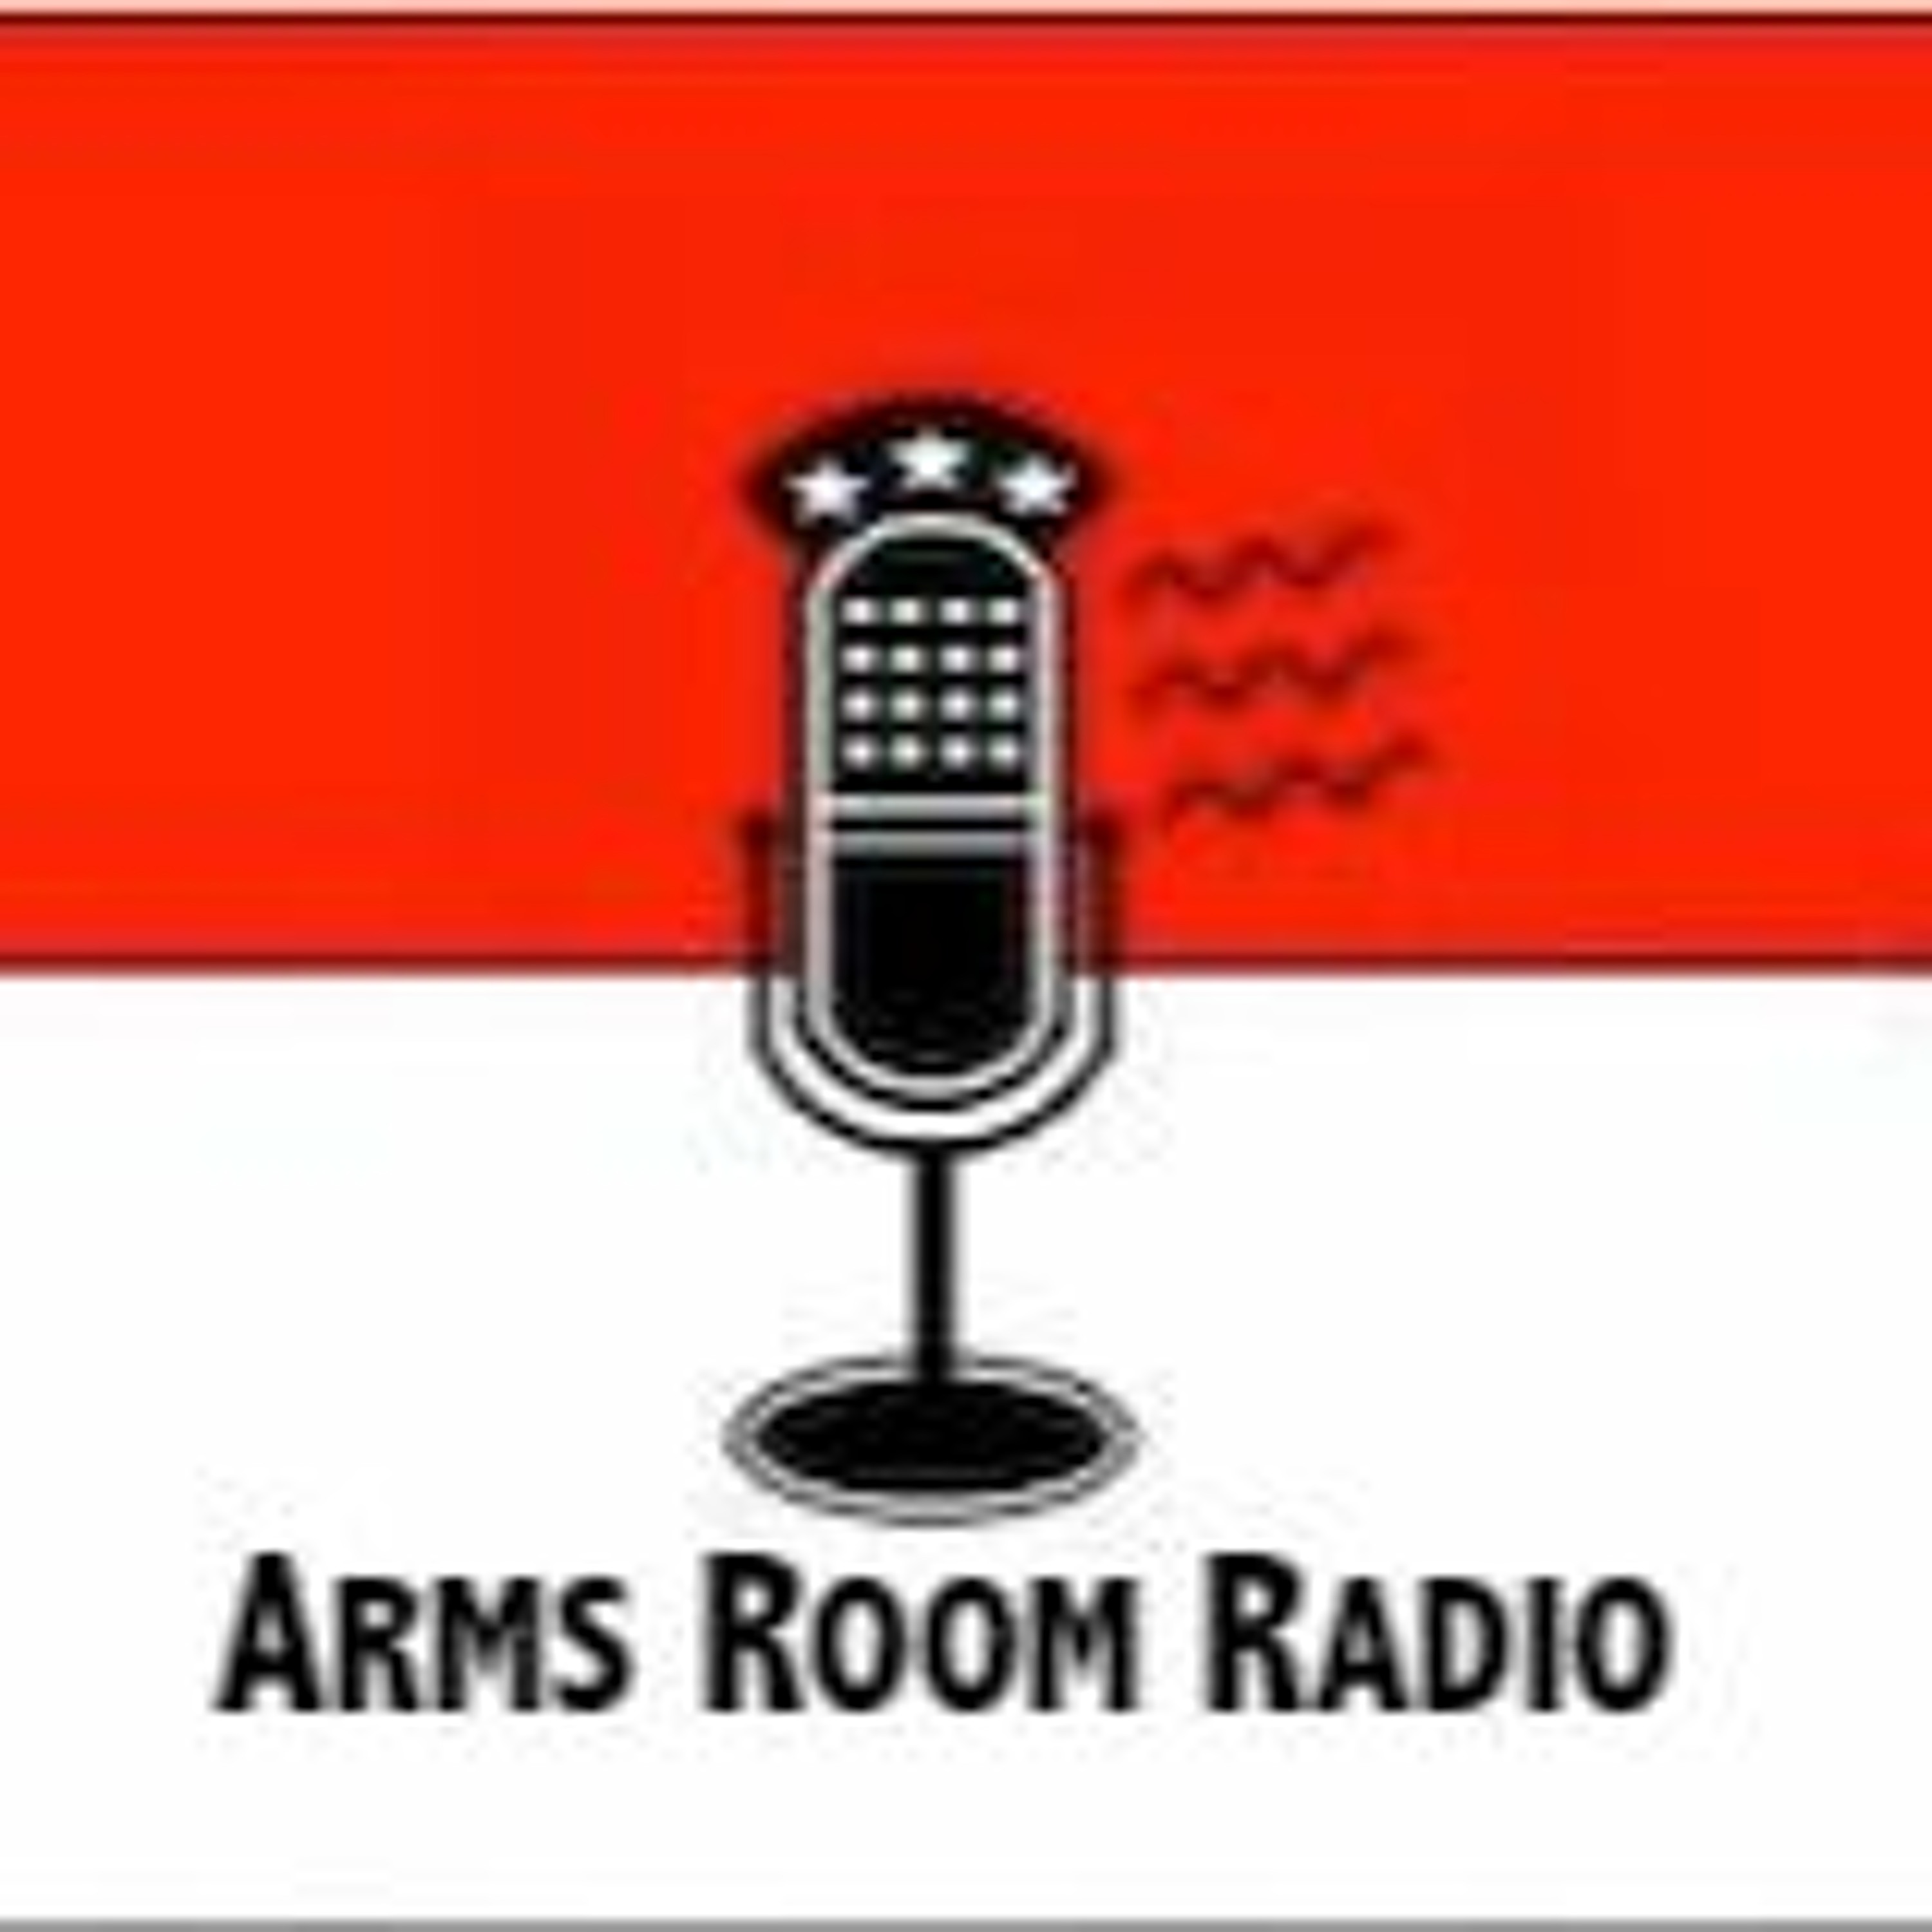 ArmsRoomRadio 07.10.21 How to store ammo